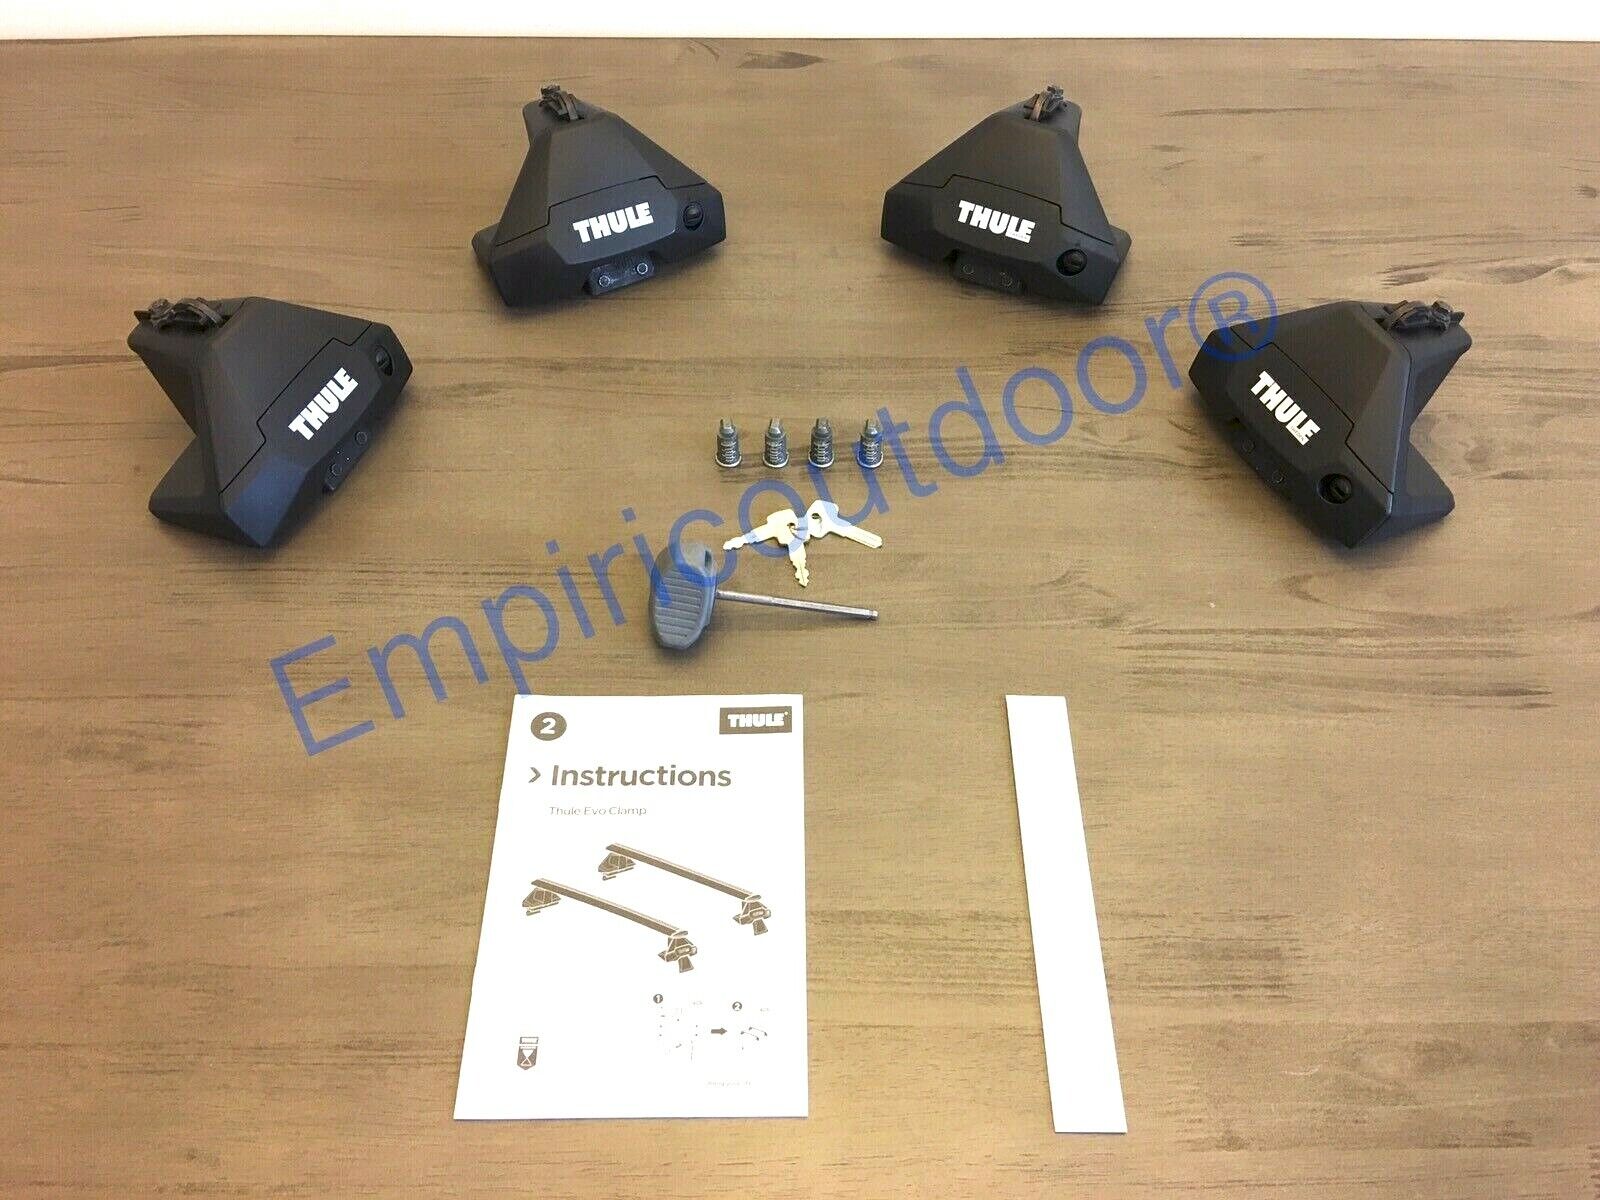 New Thule Evo clamp & Thule One-Key System. Free Expedited ship